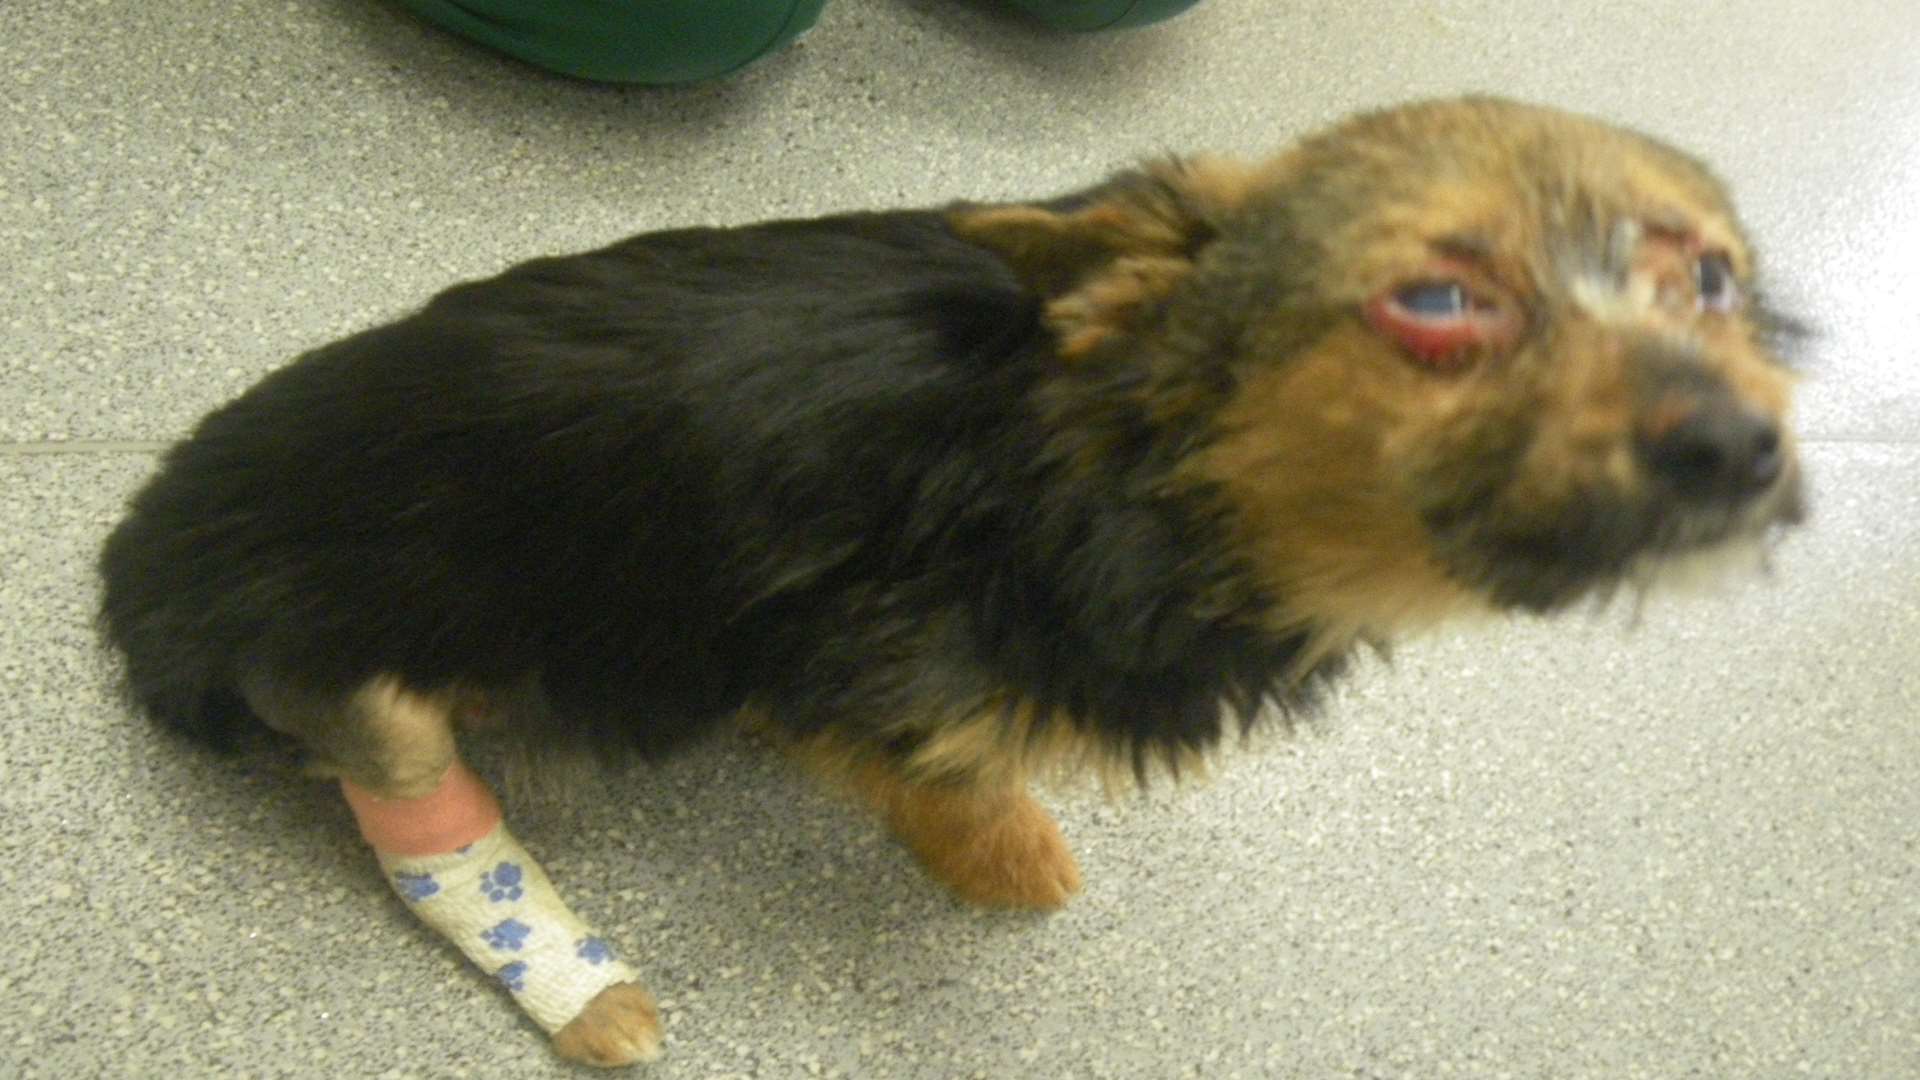 Chunky was stolen, tortured and dumped at a rubbish tip